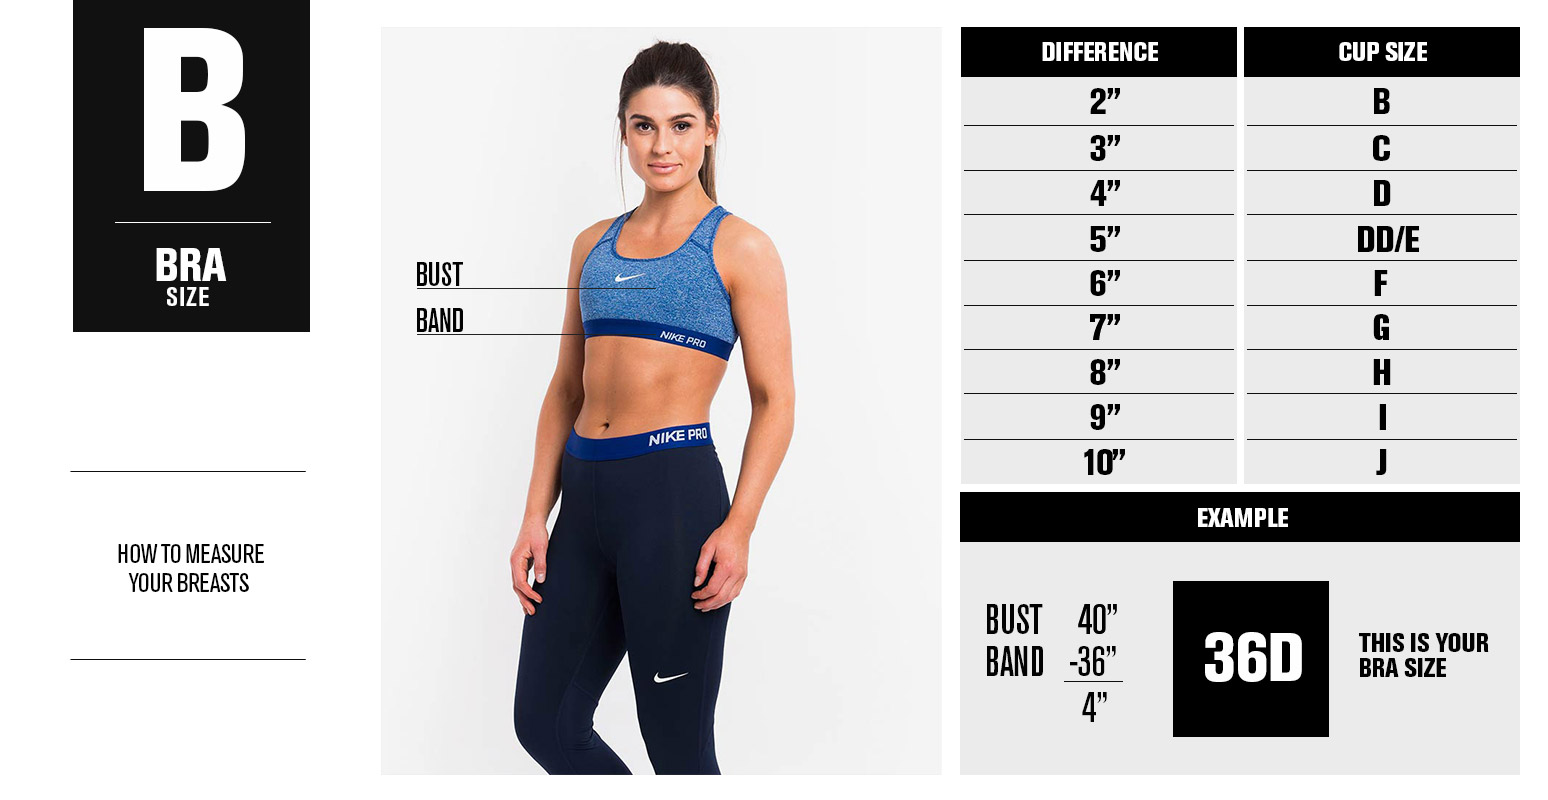 How To Choose The Right Sports Bra Life Style Sports